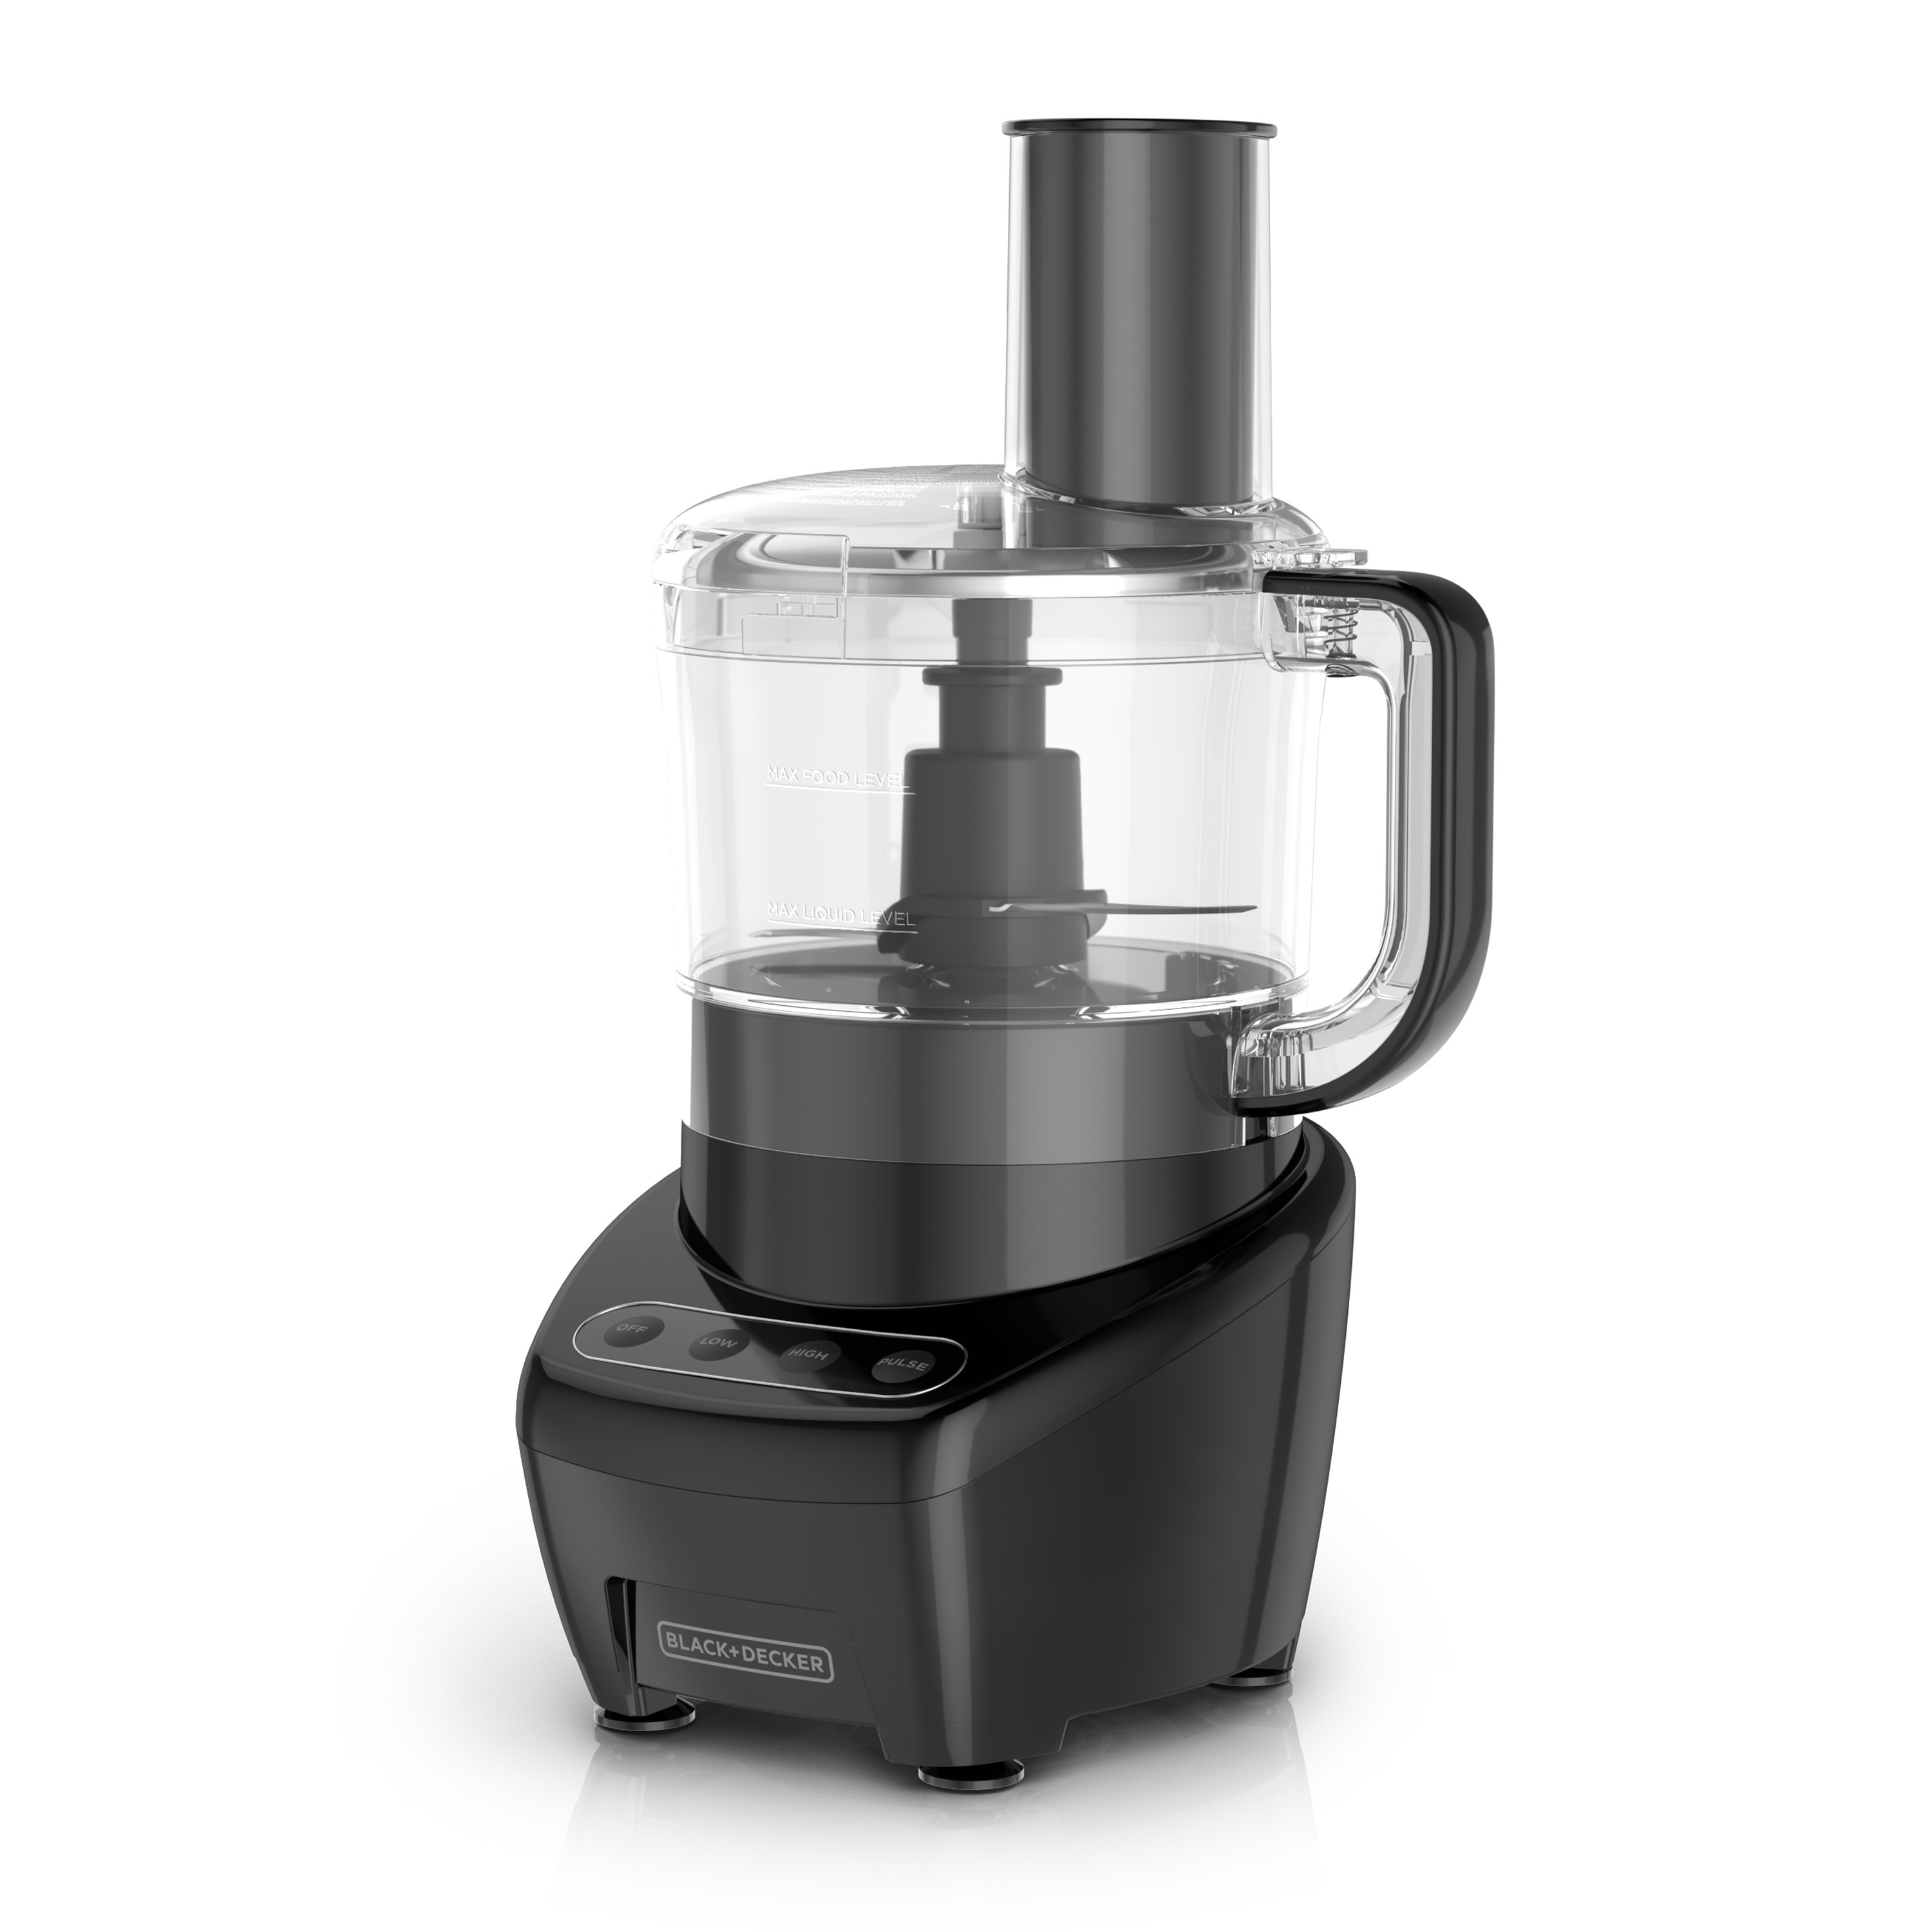 The eight-cup food processor